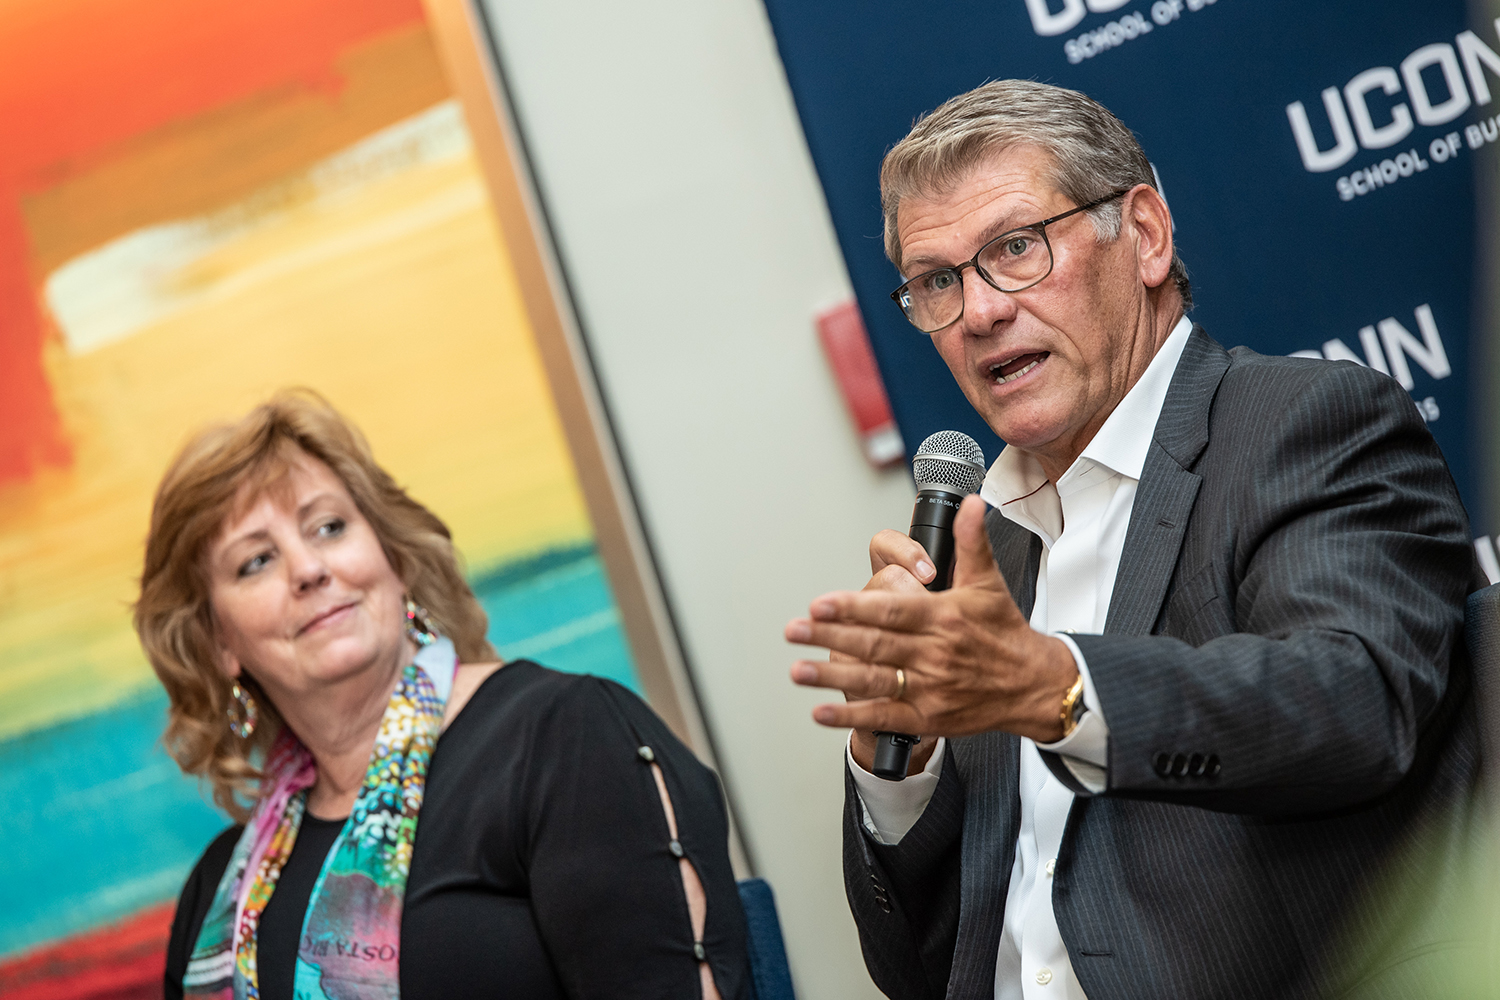 Lucy Gilson (left), Associate Dean of the UConn School of Business and Geno Auriemma (right), Head Coach of UConn Women's Basketball, speak during the first day of the Leadership Conference. This year's program focused on leading through complexity and uncertainty. (Nathan Oldham / UConn School of Business)